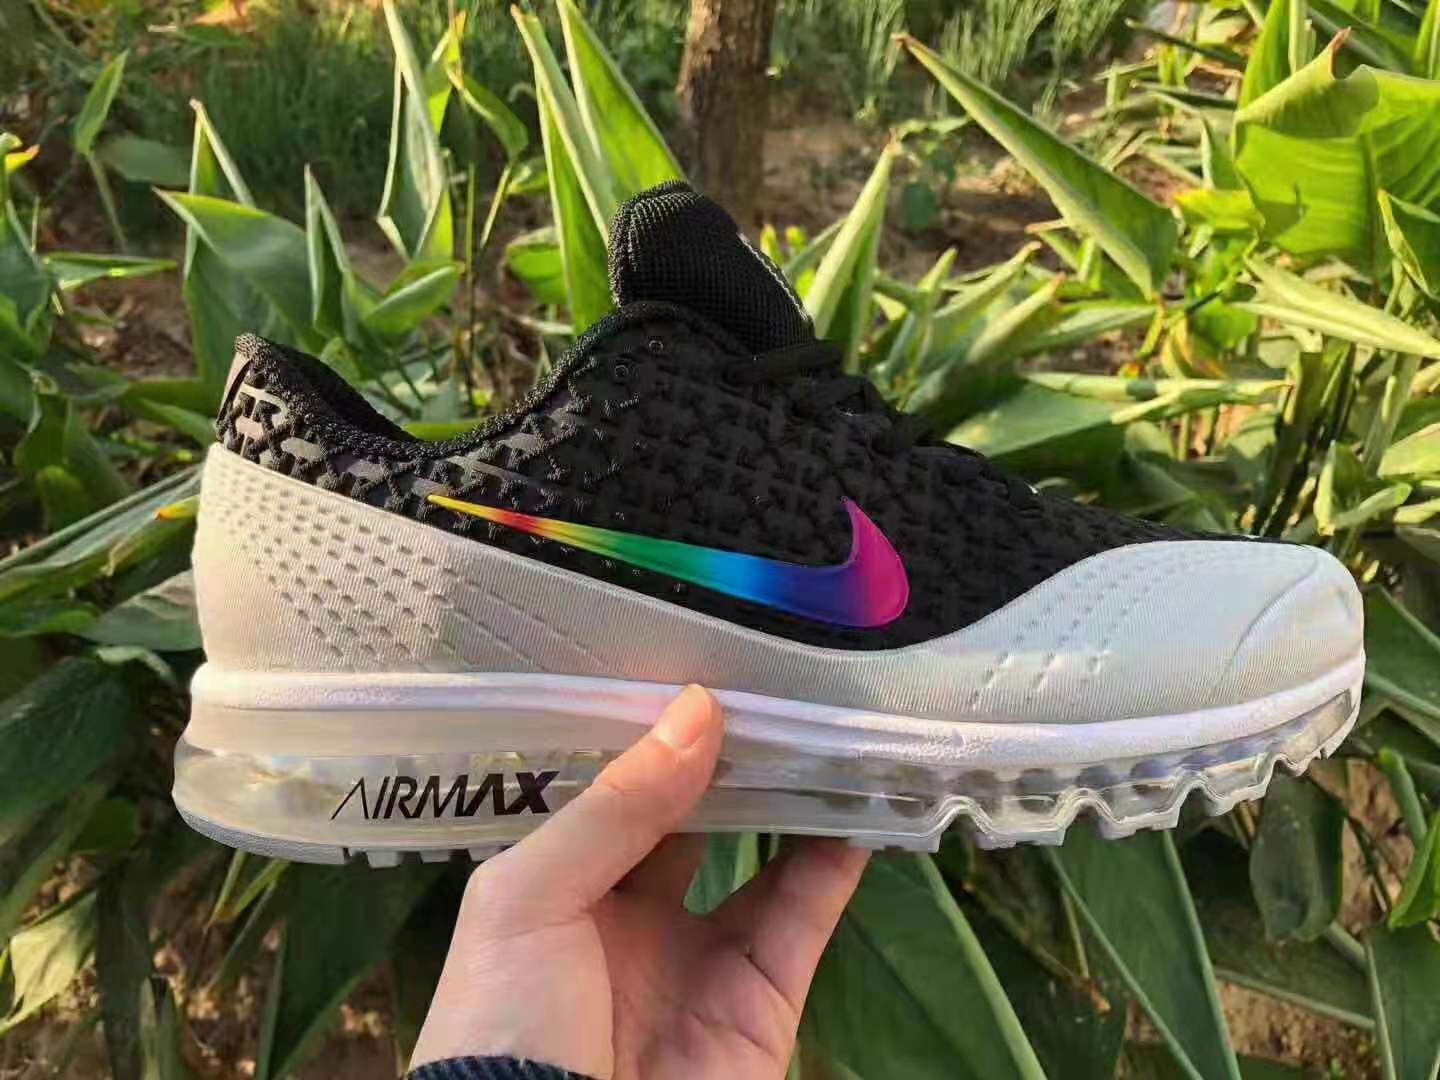 Men's Hot sale Running weapon Nike Air Max 2019 Shoes 091